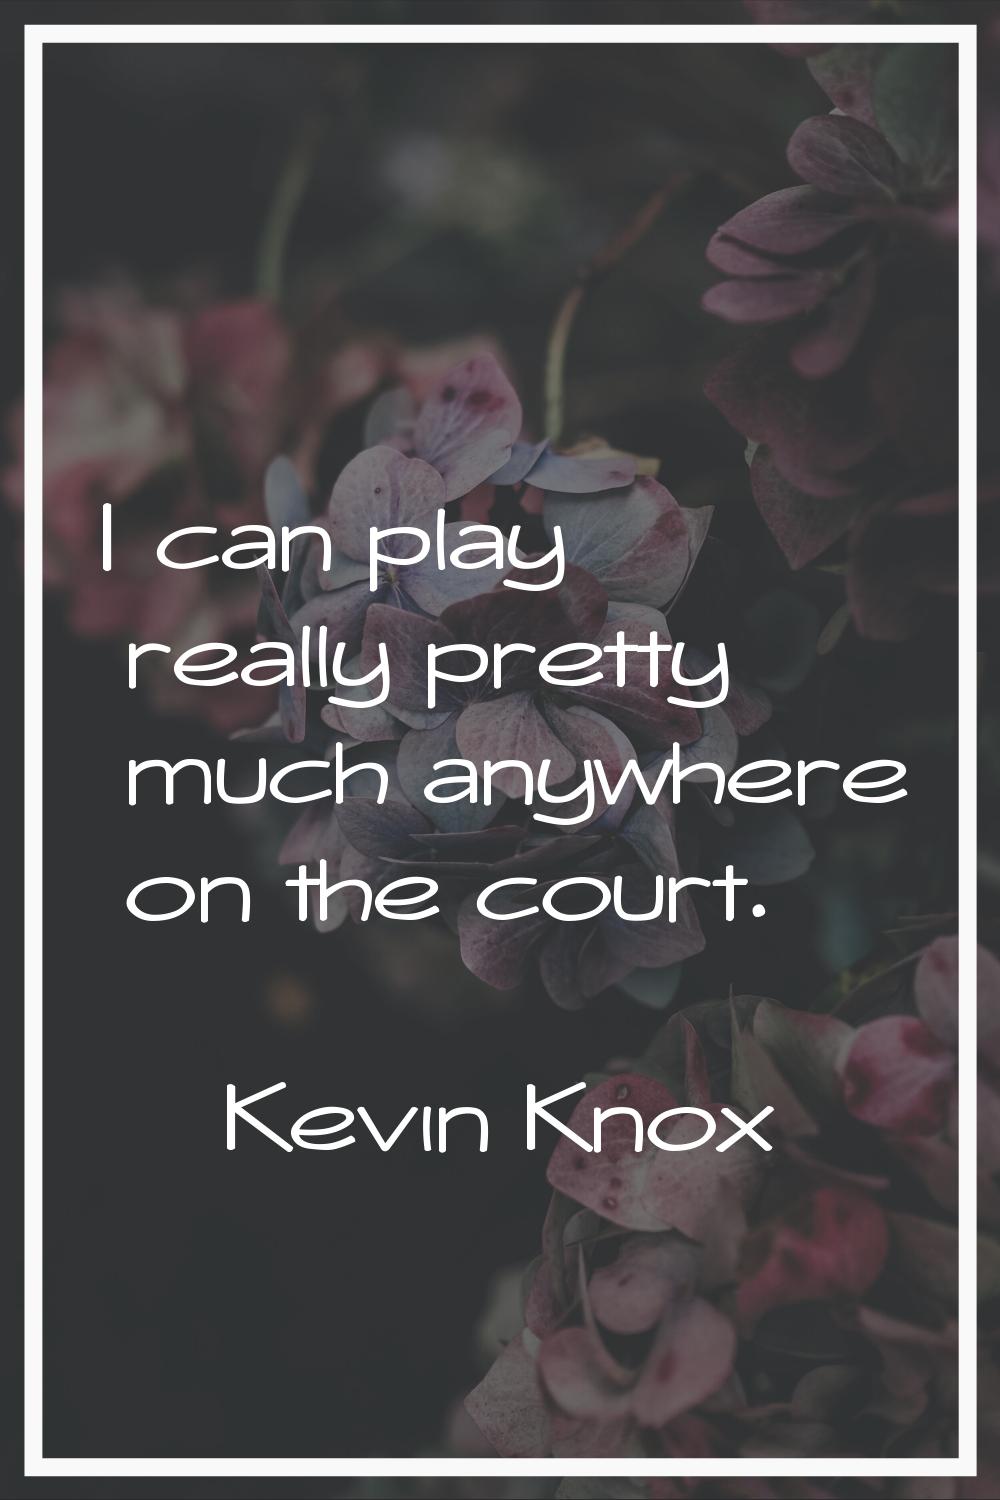 I can play really pretty much anywhere on the court.